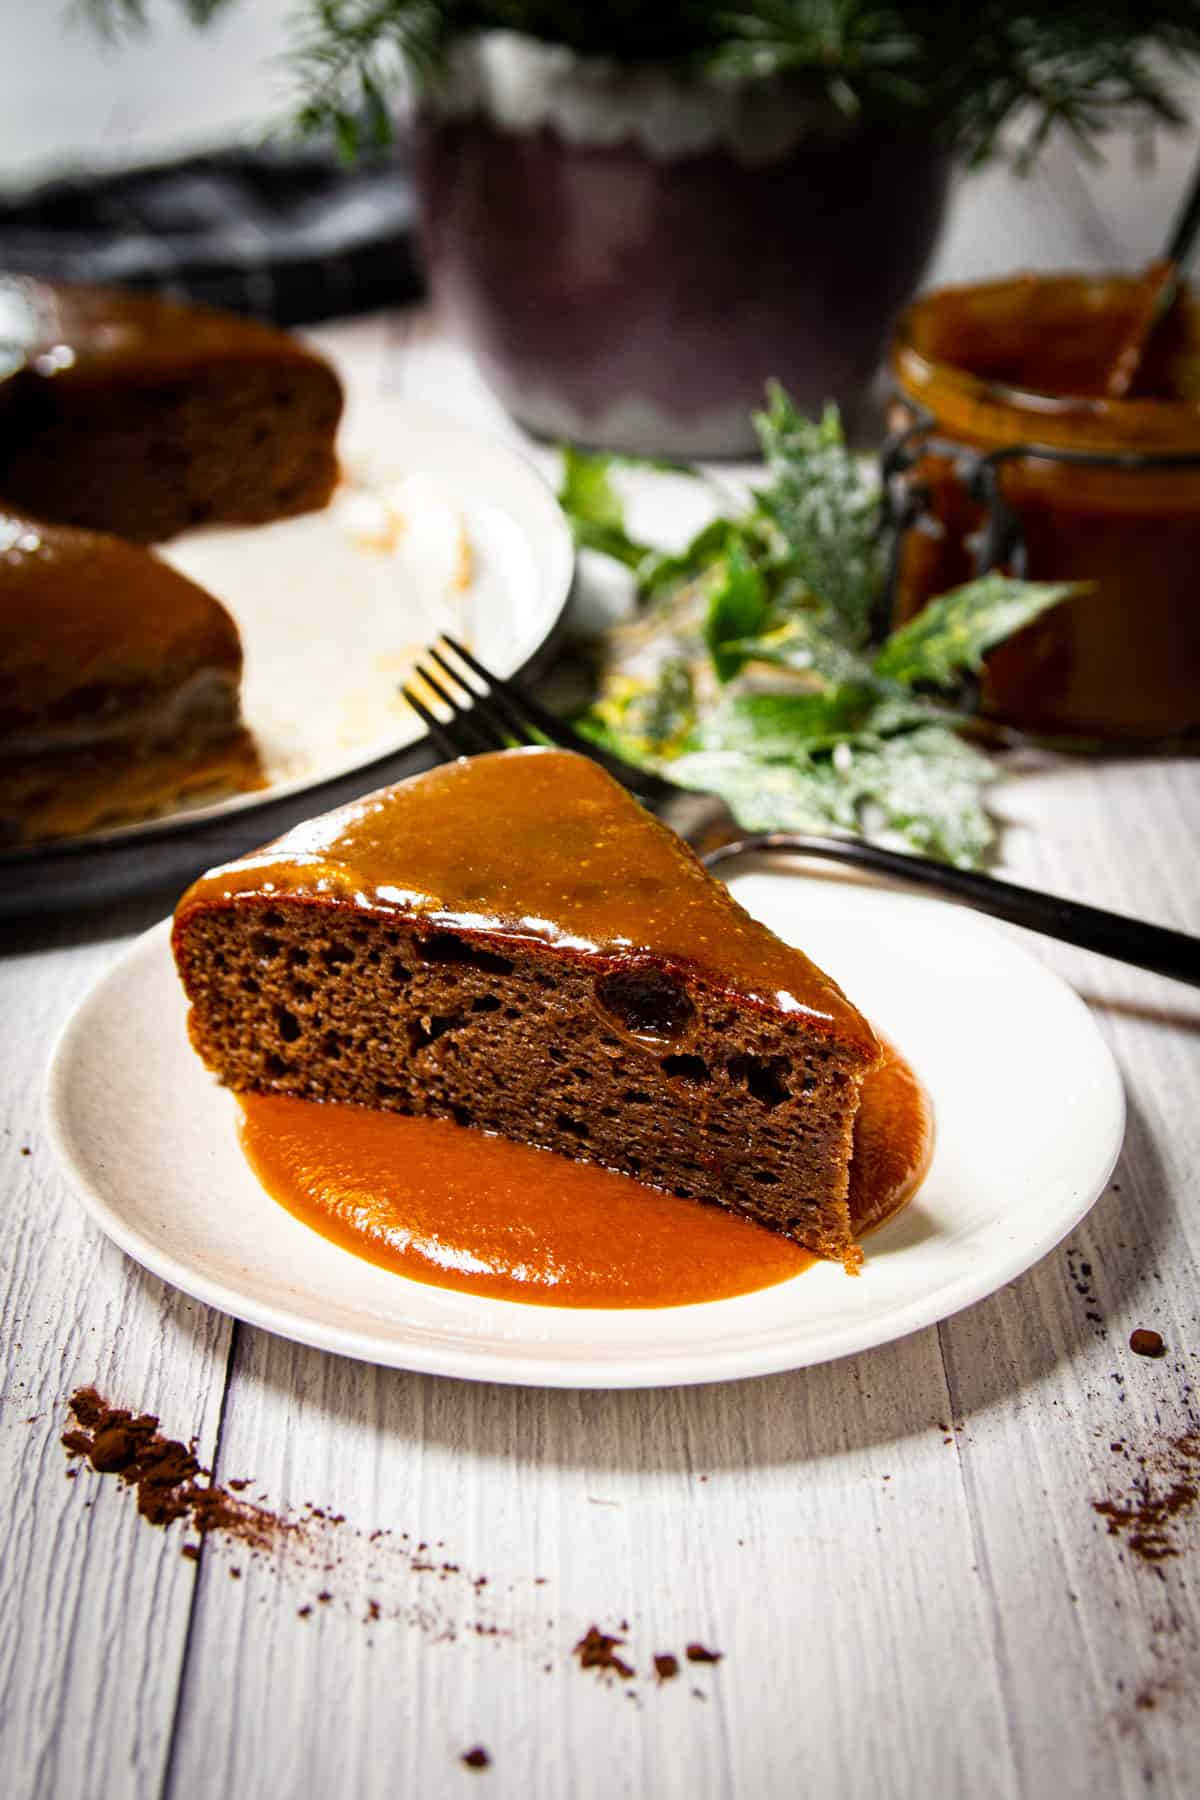 A slice of the sticky toffee pudding with the full cake and some christmas decorations in the background.